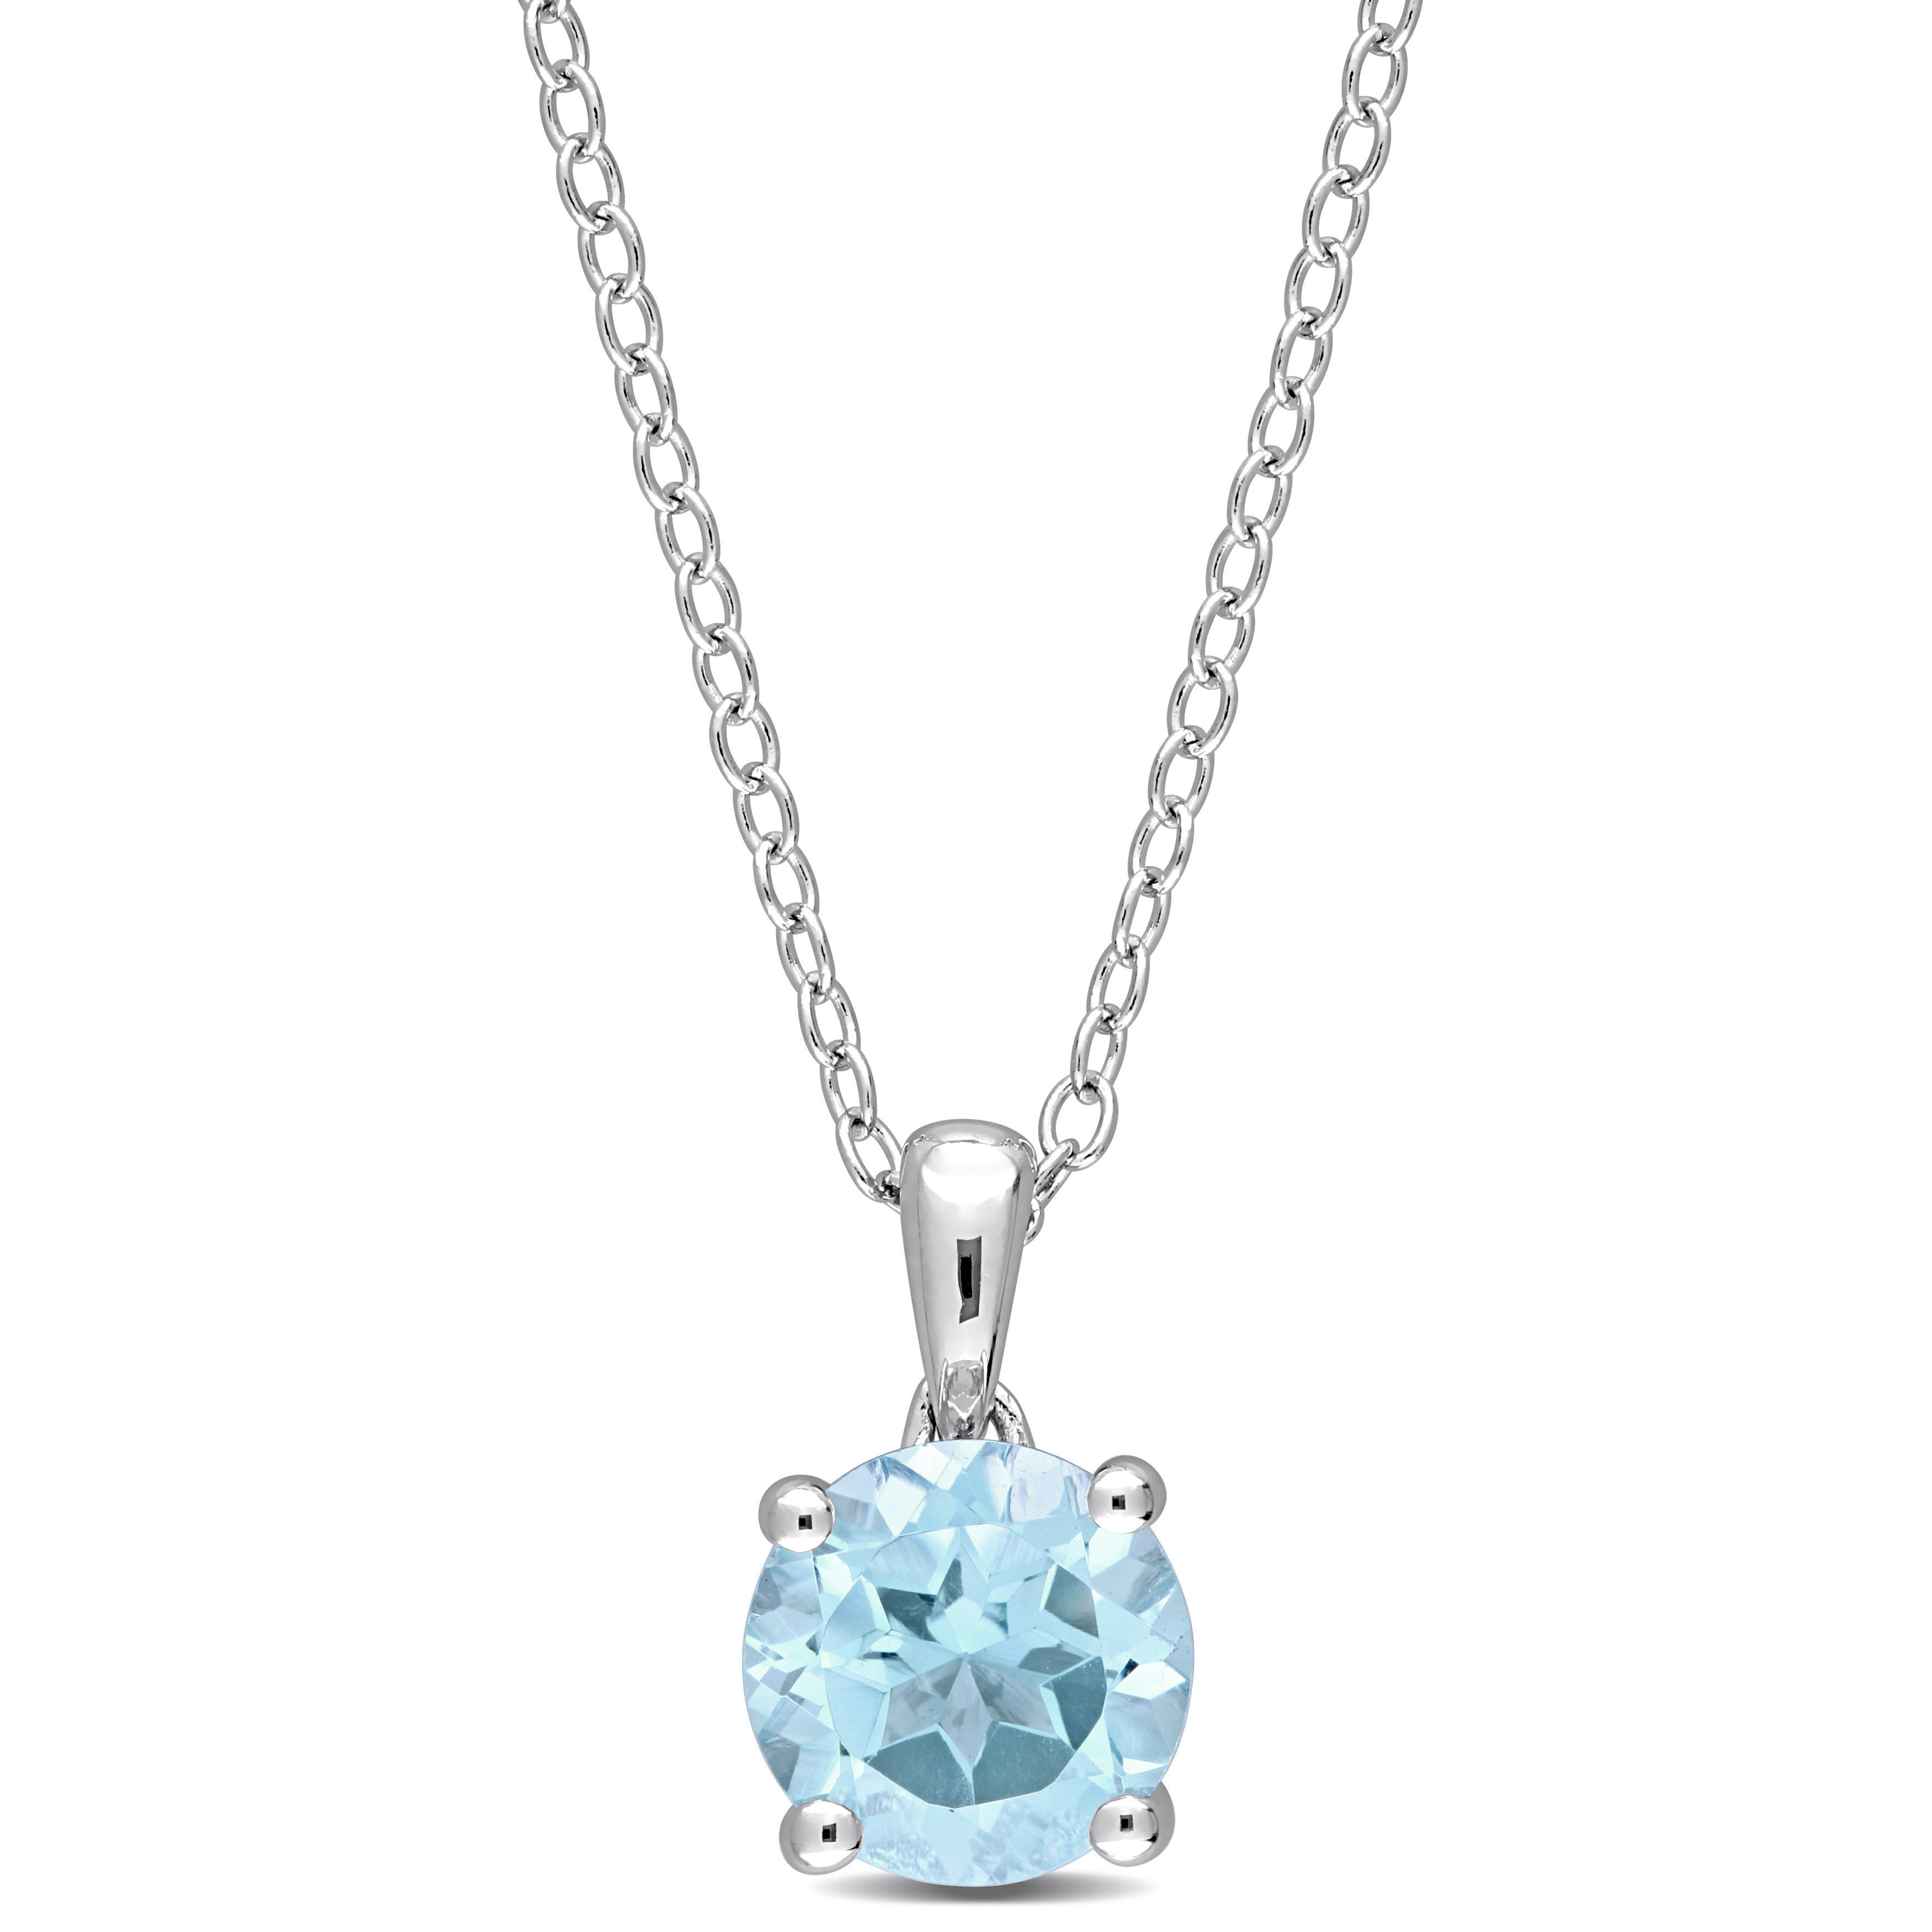 1 1/2 CT TGW Sky Blue Topaz Solitaire Pendant with Chain in Sterling Silver